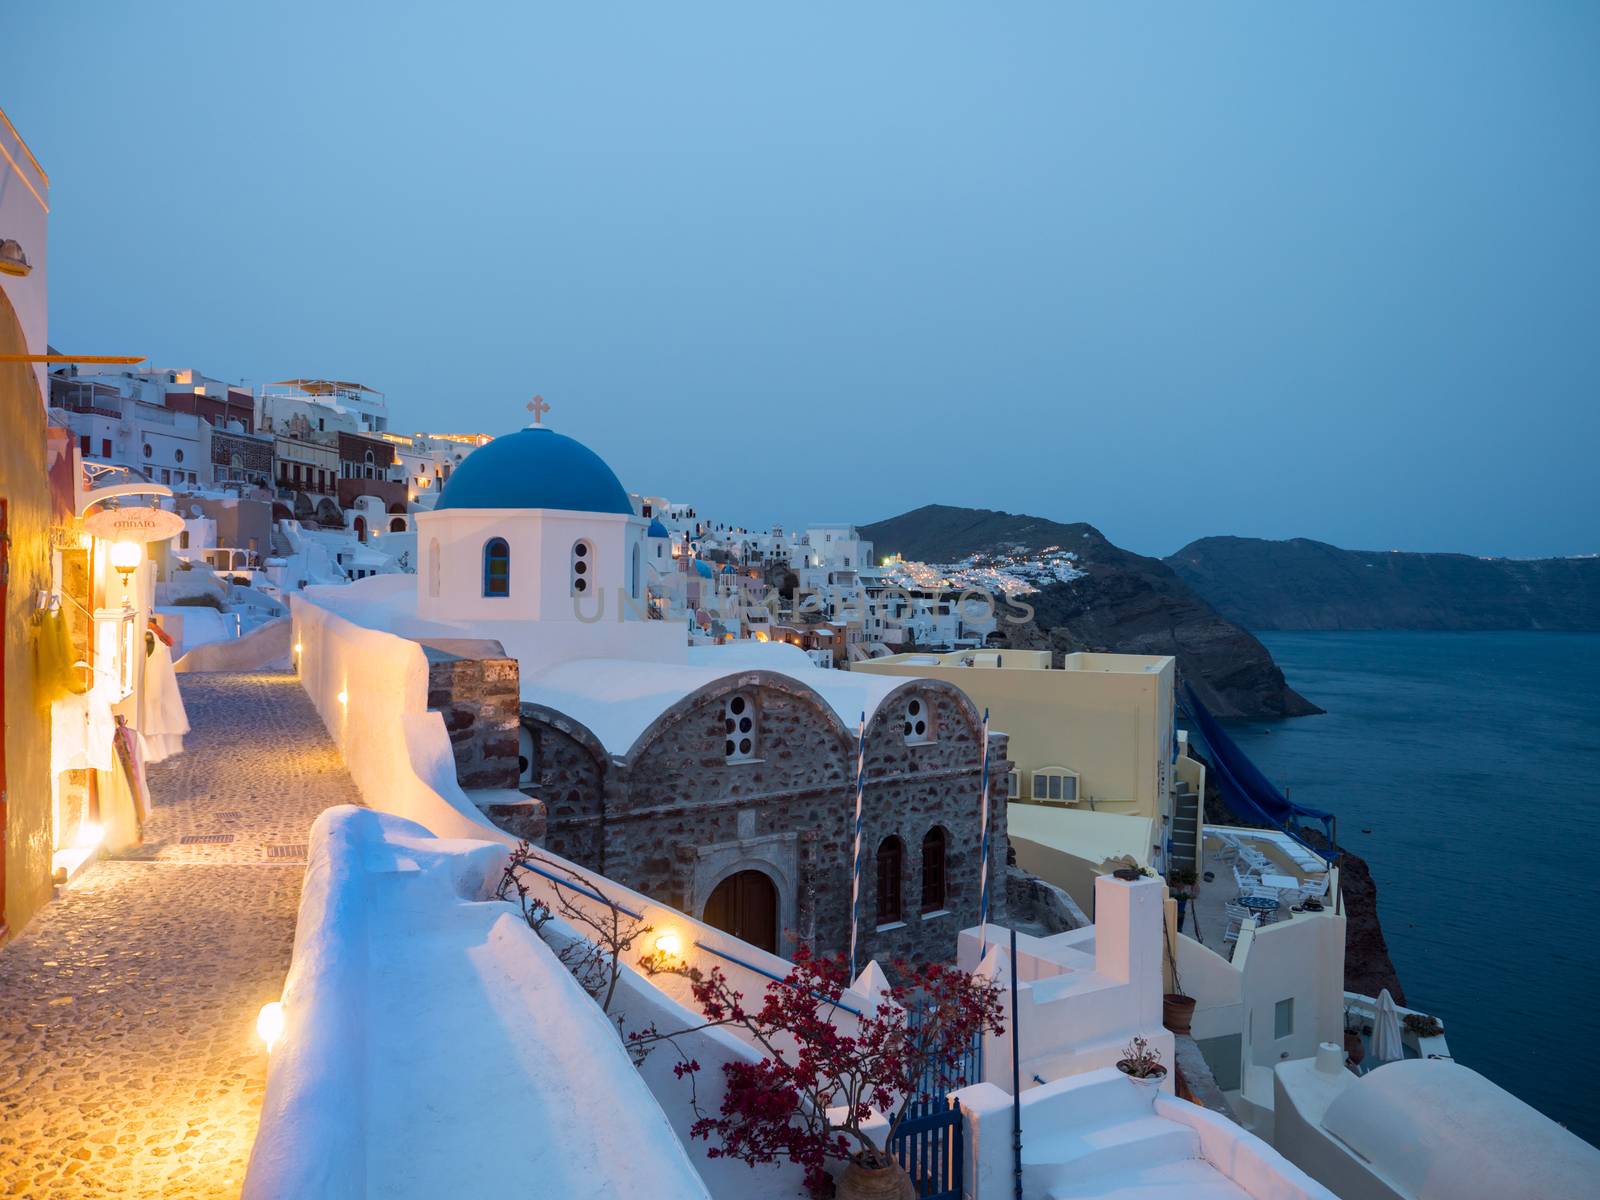 Small white houses with lights late in the afternoon in Oia, Santorini island,Greece